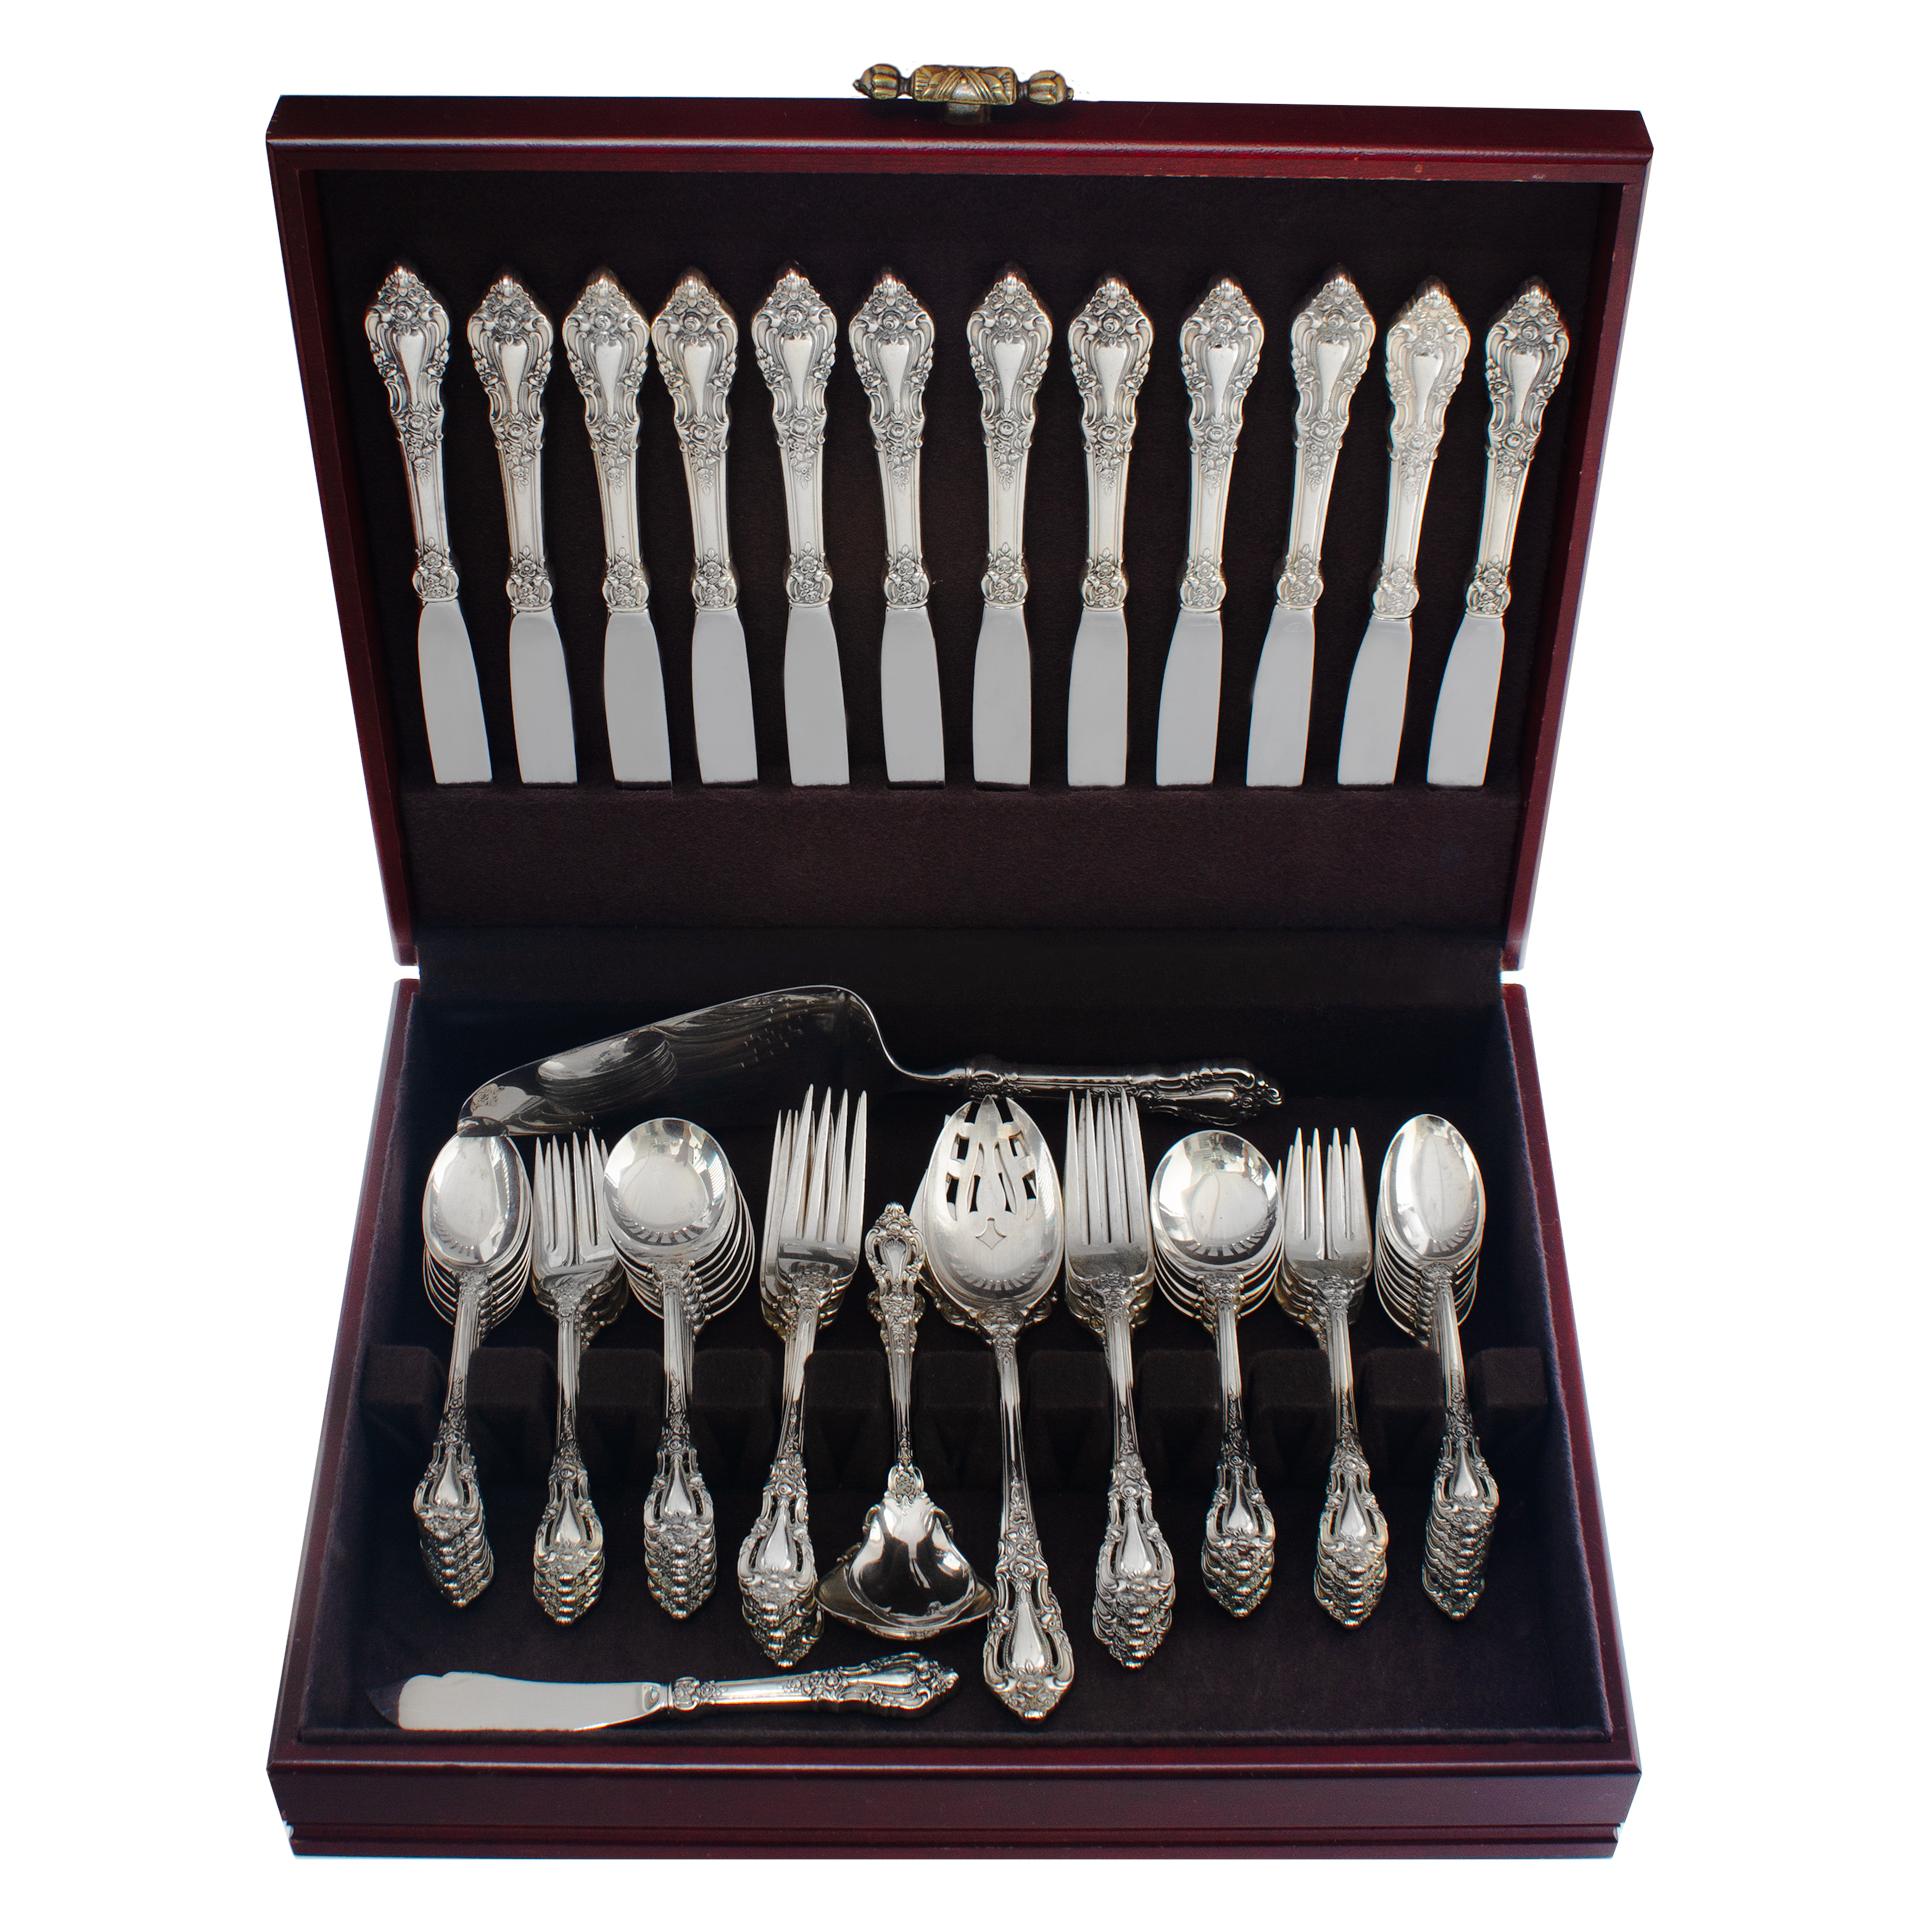 YOUR PRICE: $4,760

ELOQUENCE sterling silver flatware set patented in 1953 by Lunt. 5 Place set for 12 with 7 serving pieces. Over 2700 grams of sterling silver.

PLACE SETTING: 12 dinner knife (9